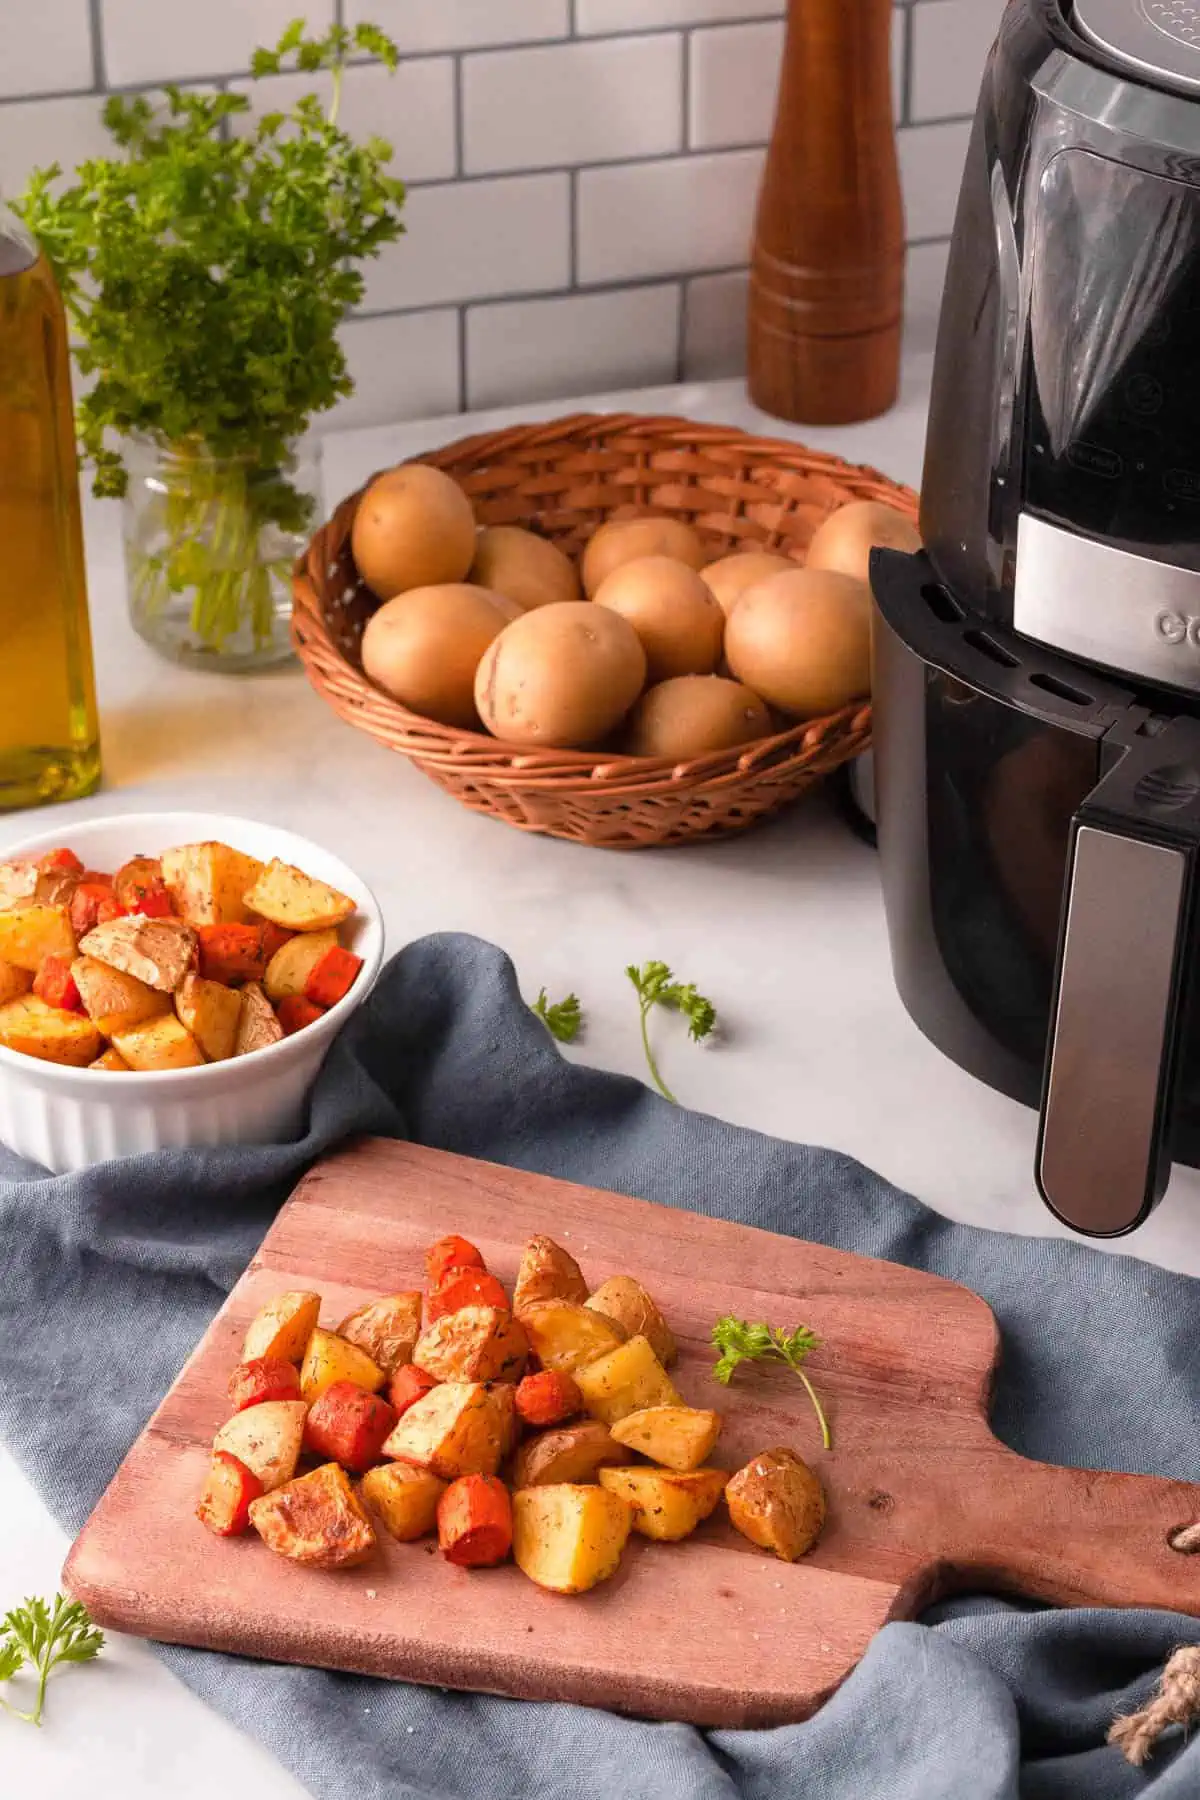 Air fried potatoes and carrots on cutting board next to air fryer and basket of potatoes